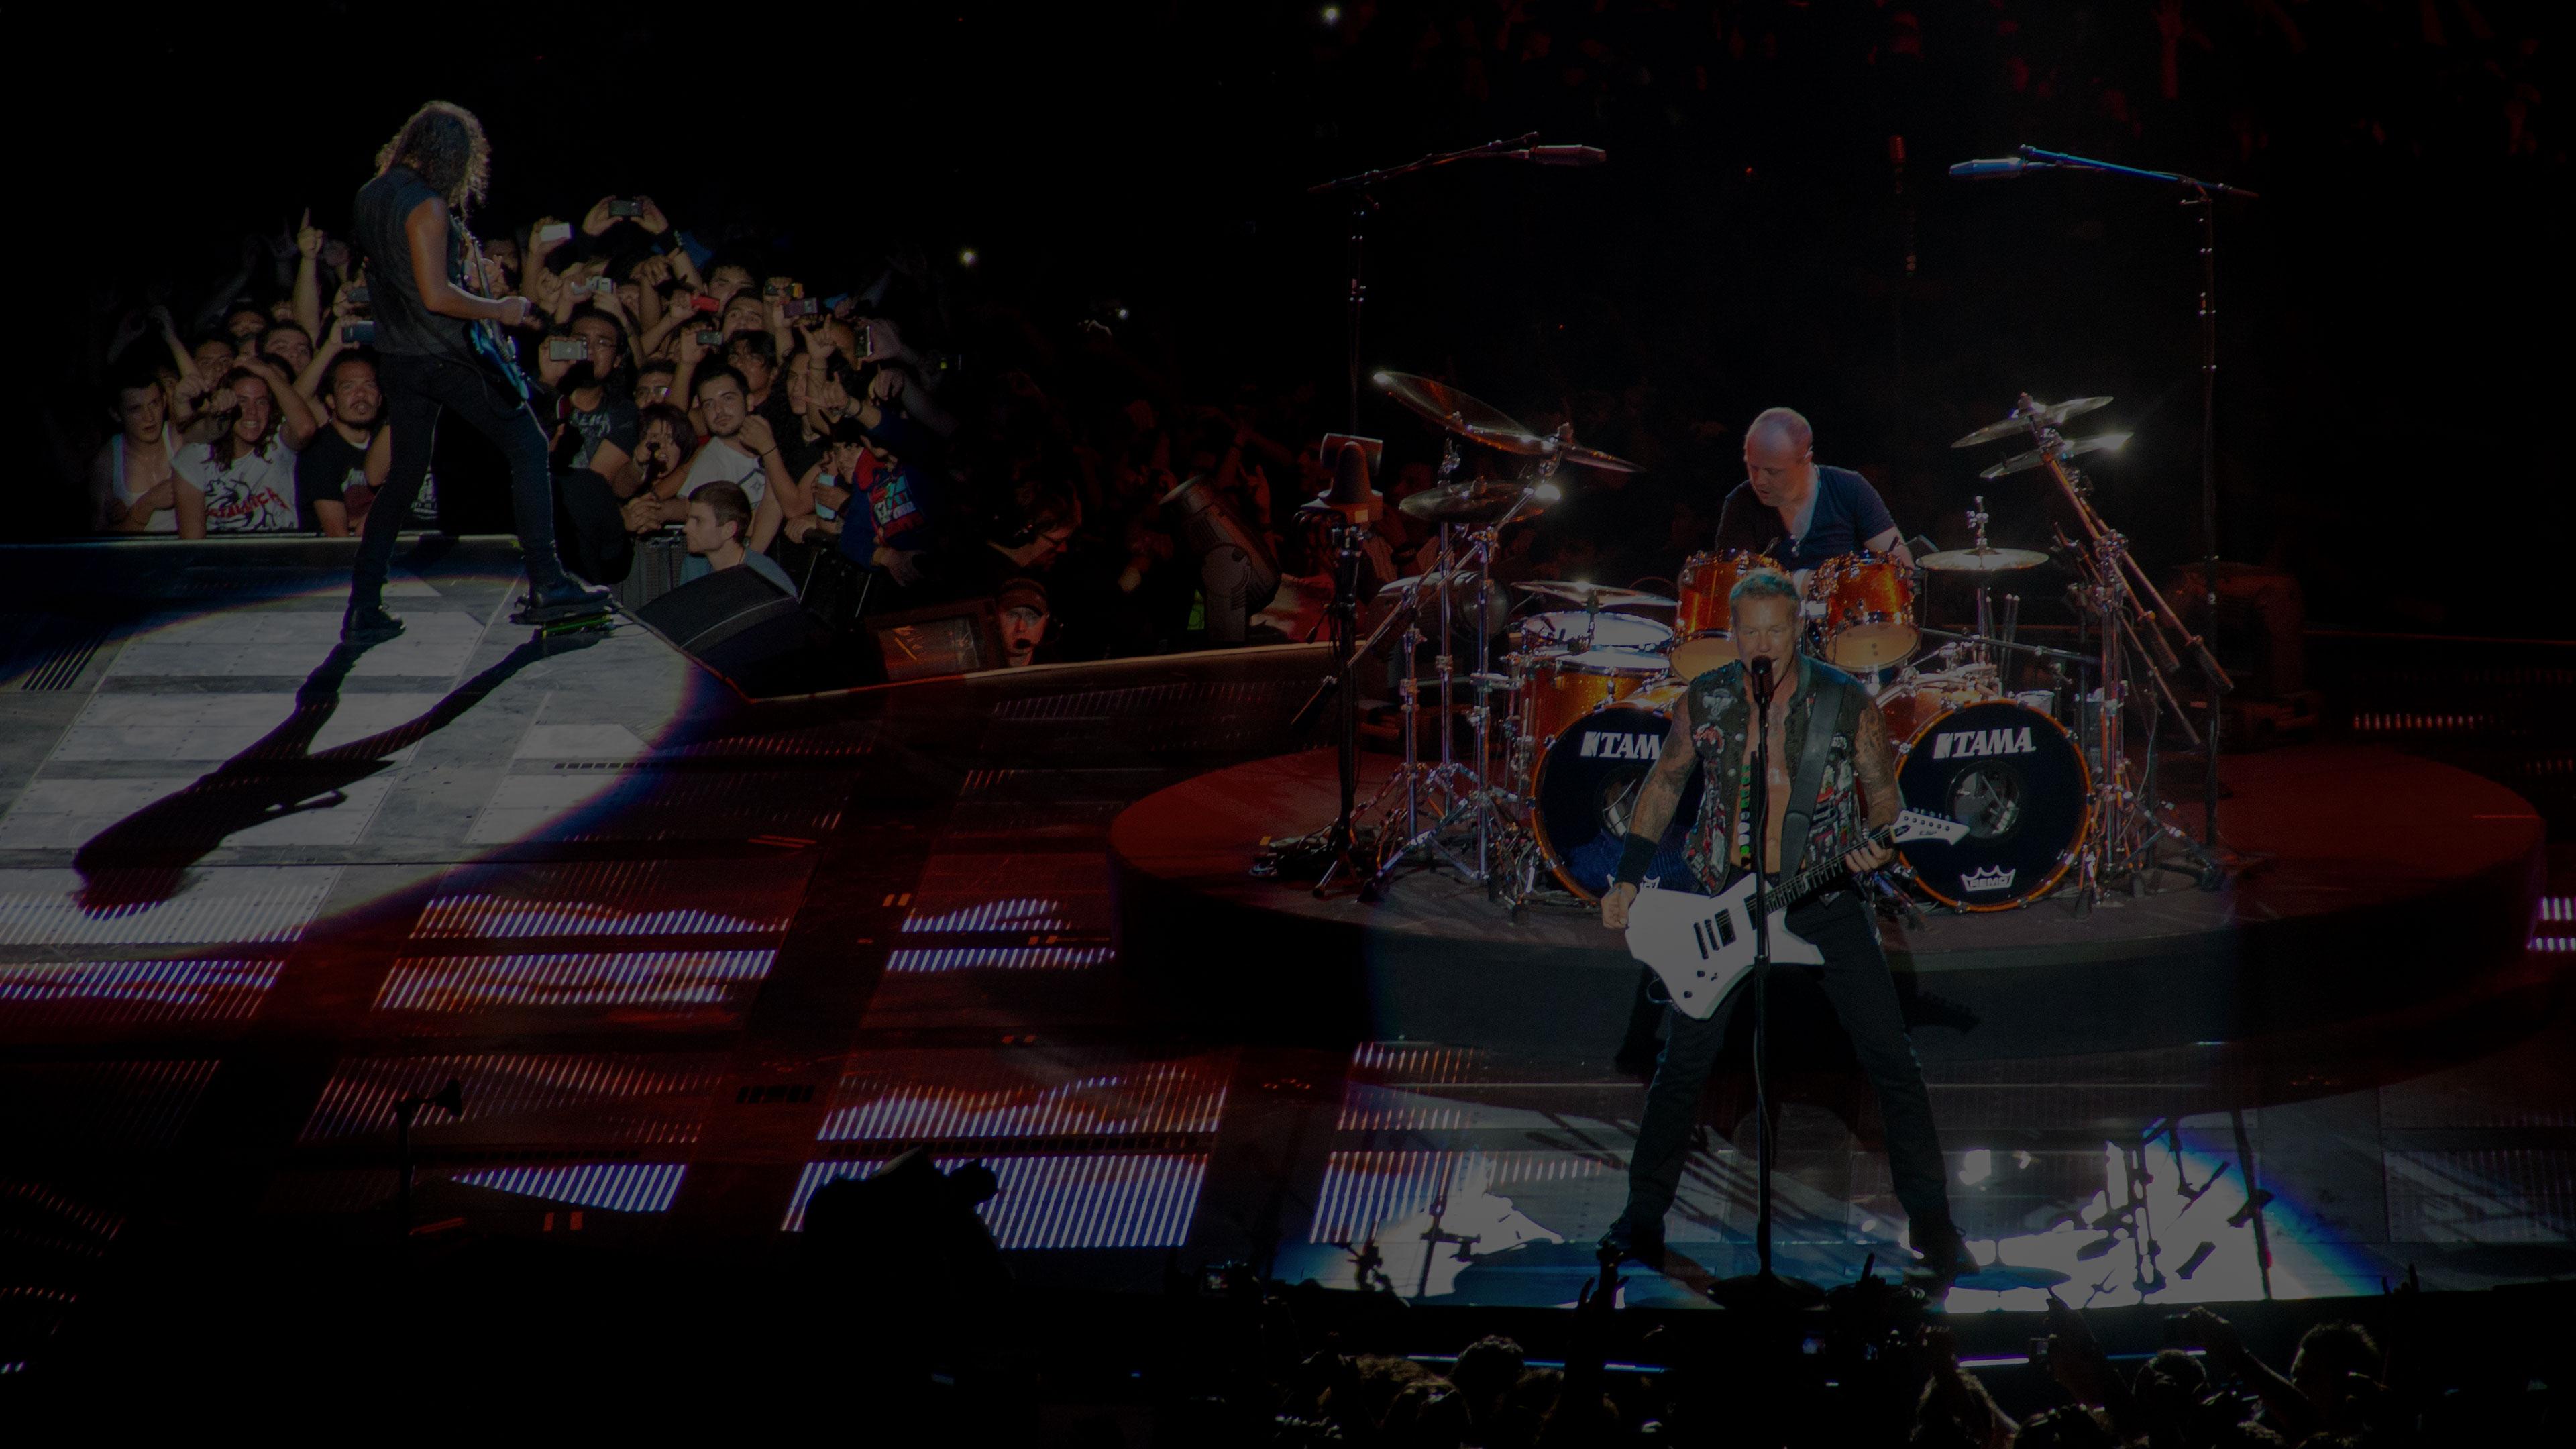 Banner Image for the photo gallery from the gig in Mexico City, Mexico shot on August 1, 2012